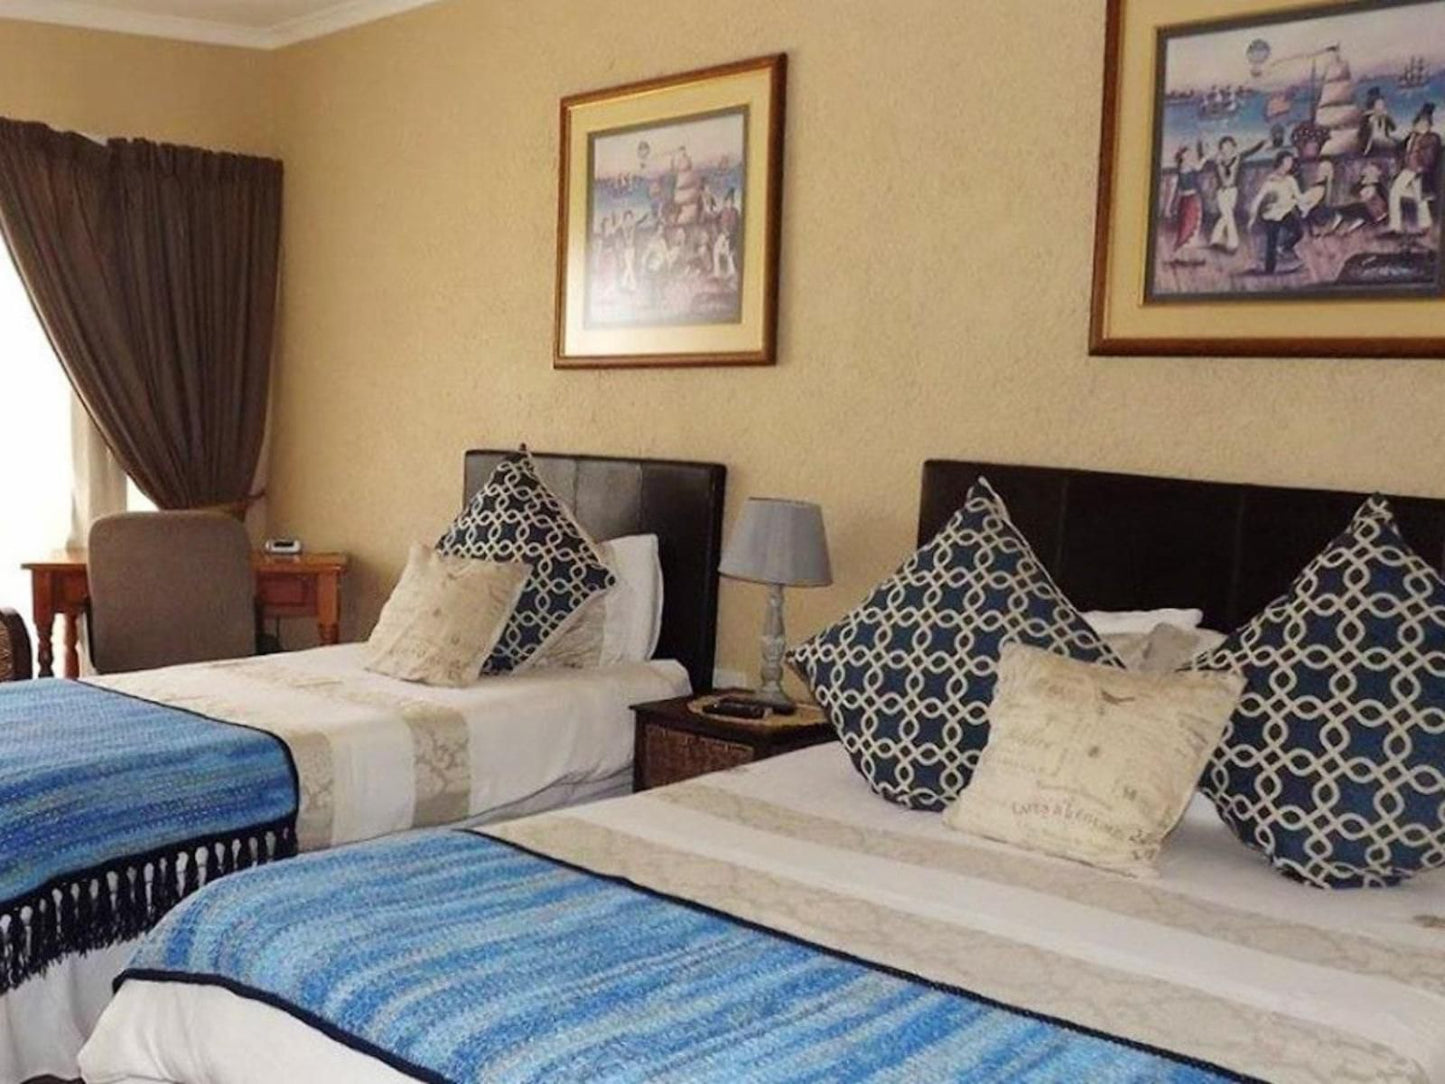 Morgenzicht Guesthouse Brackenfell Cape Town Western Cape South Africa Bedroom